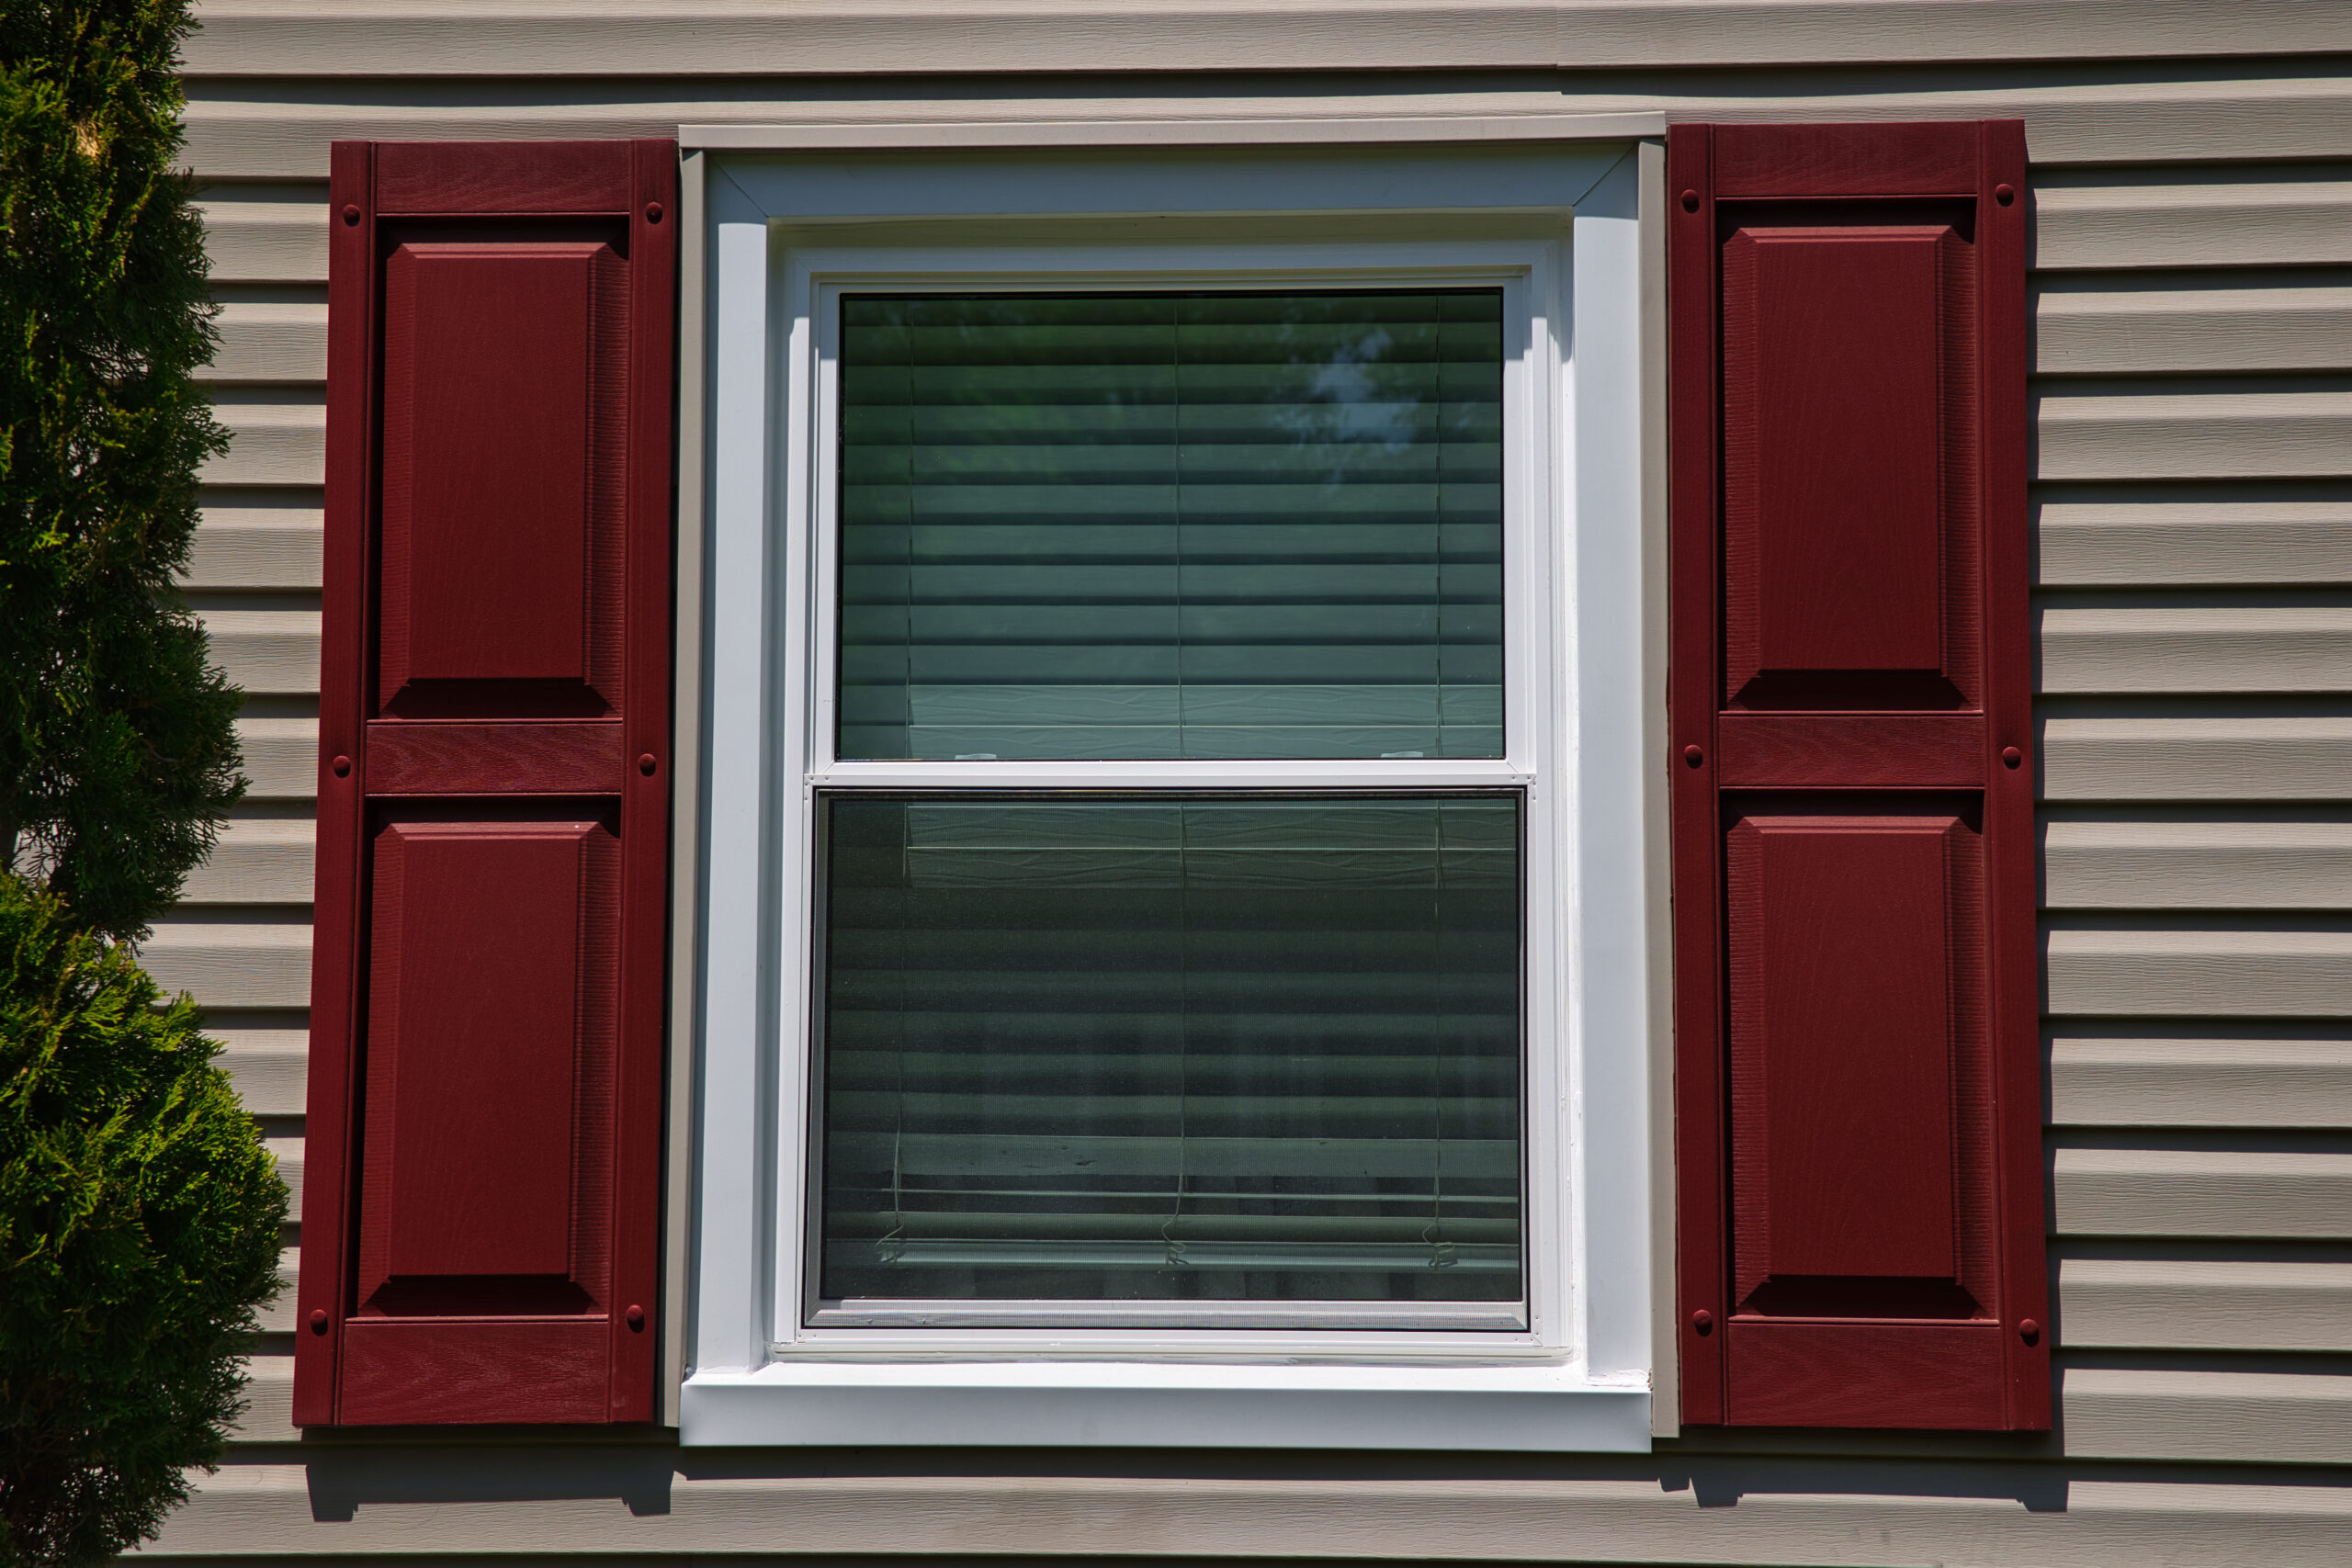 A window with red shutters.